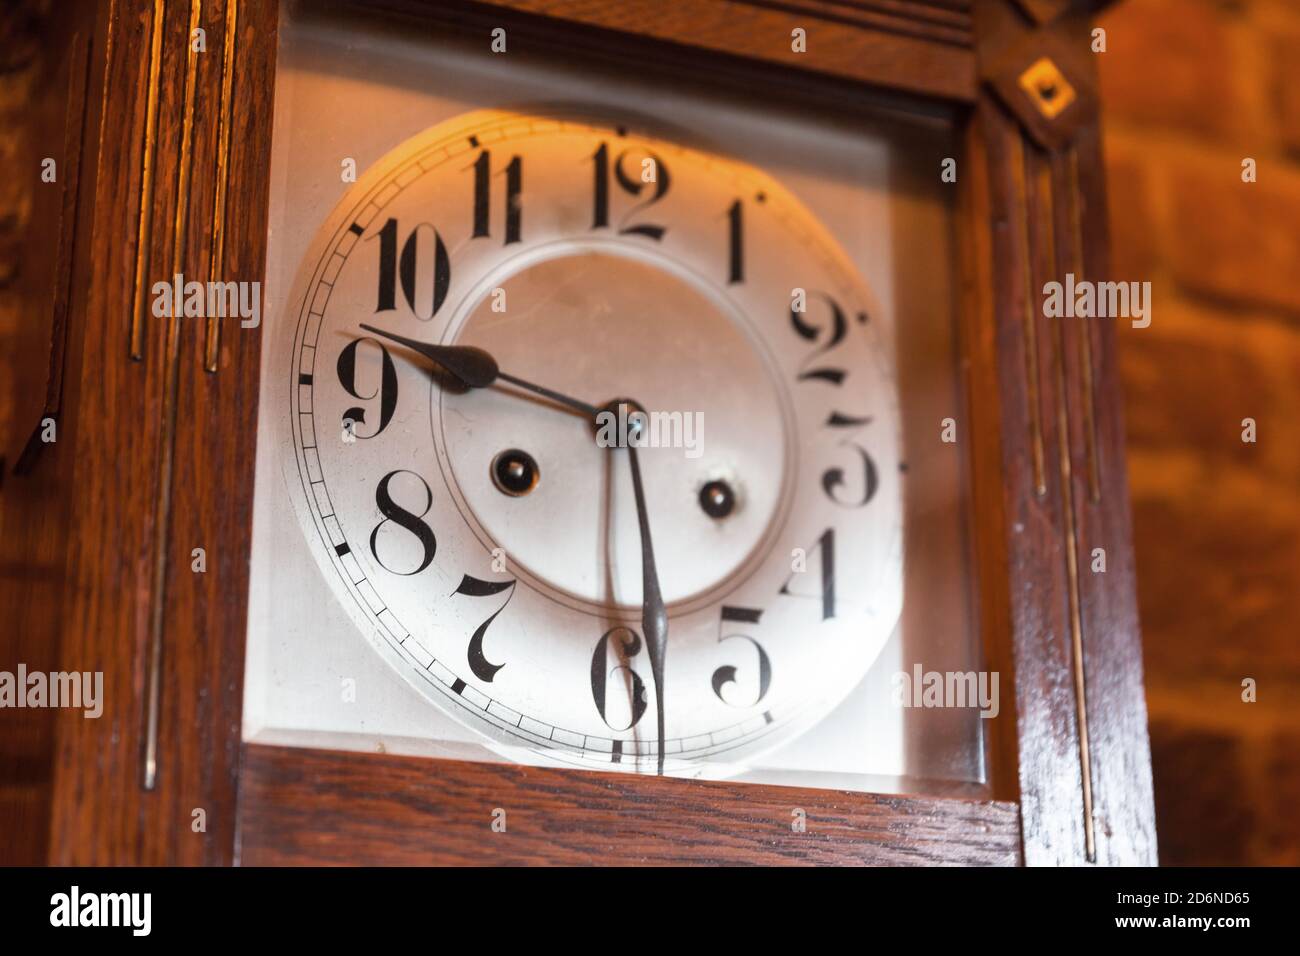 Vintage grandfather clock deal in wooden body. Close up photo Stock Photo